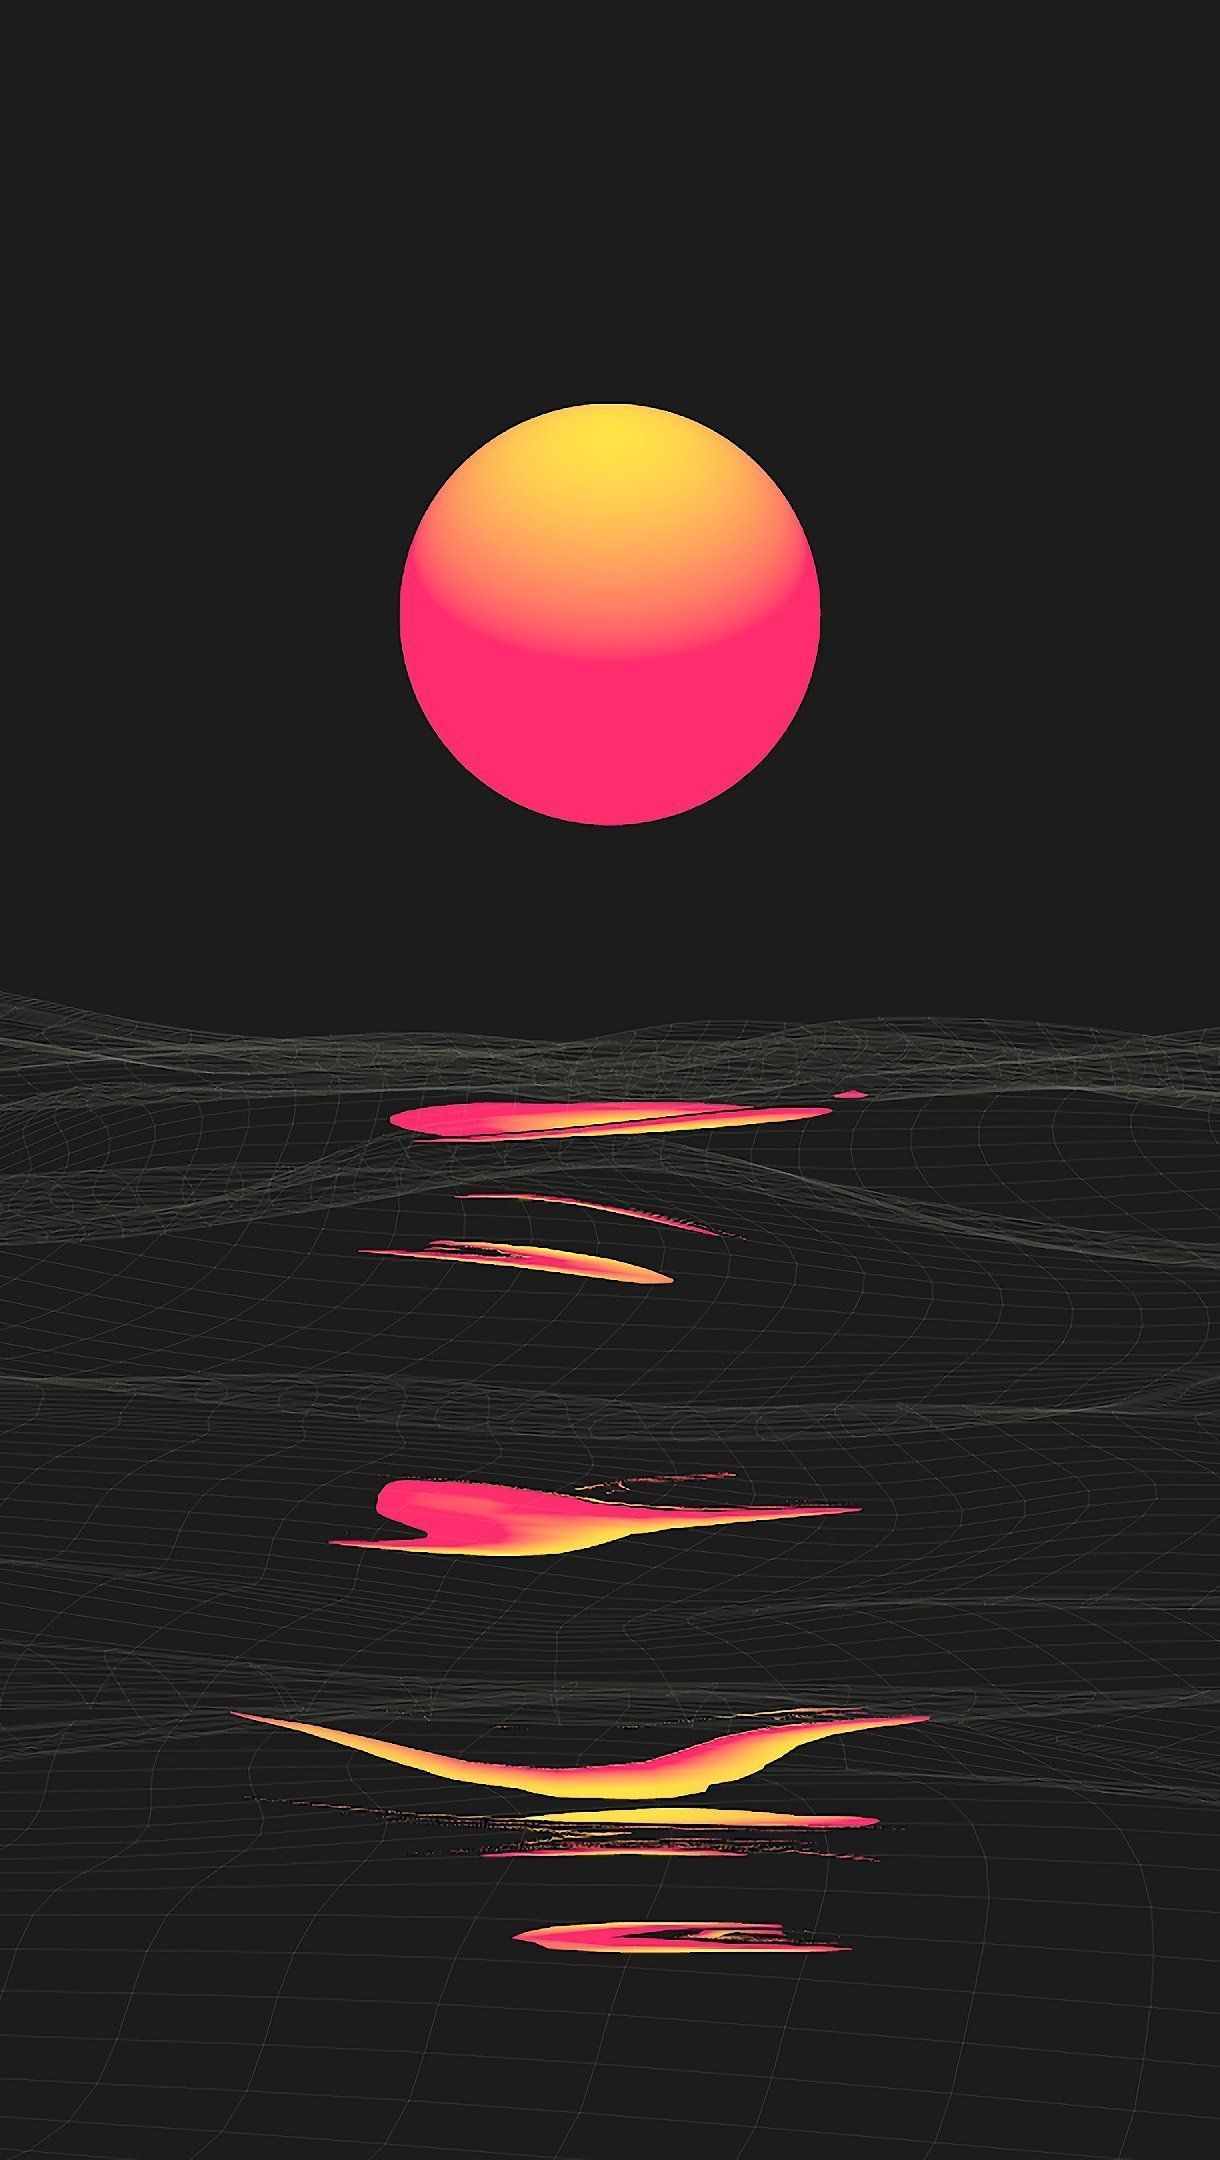 Aesthetic sunset wallpaper for your iPhone X from Reddit - Sun